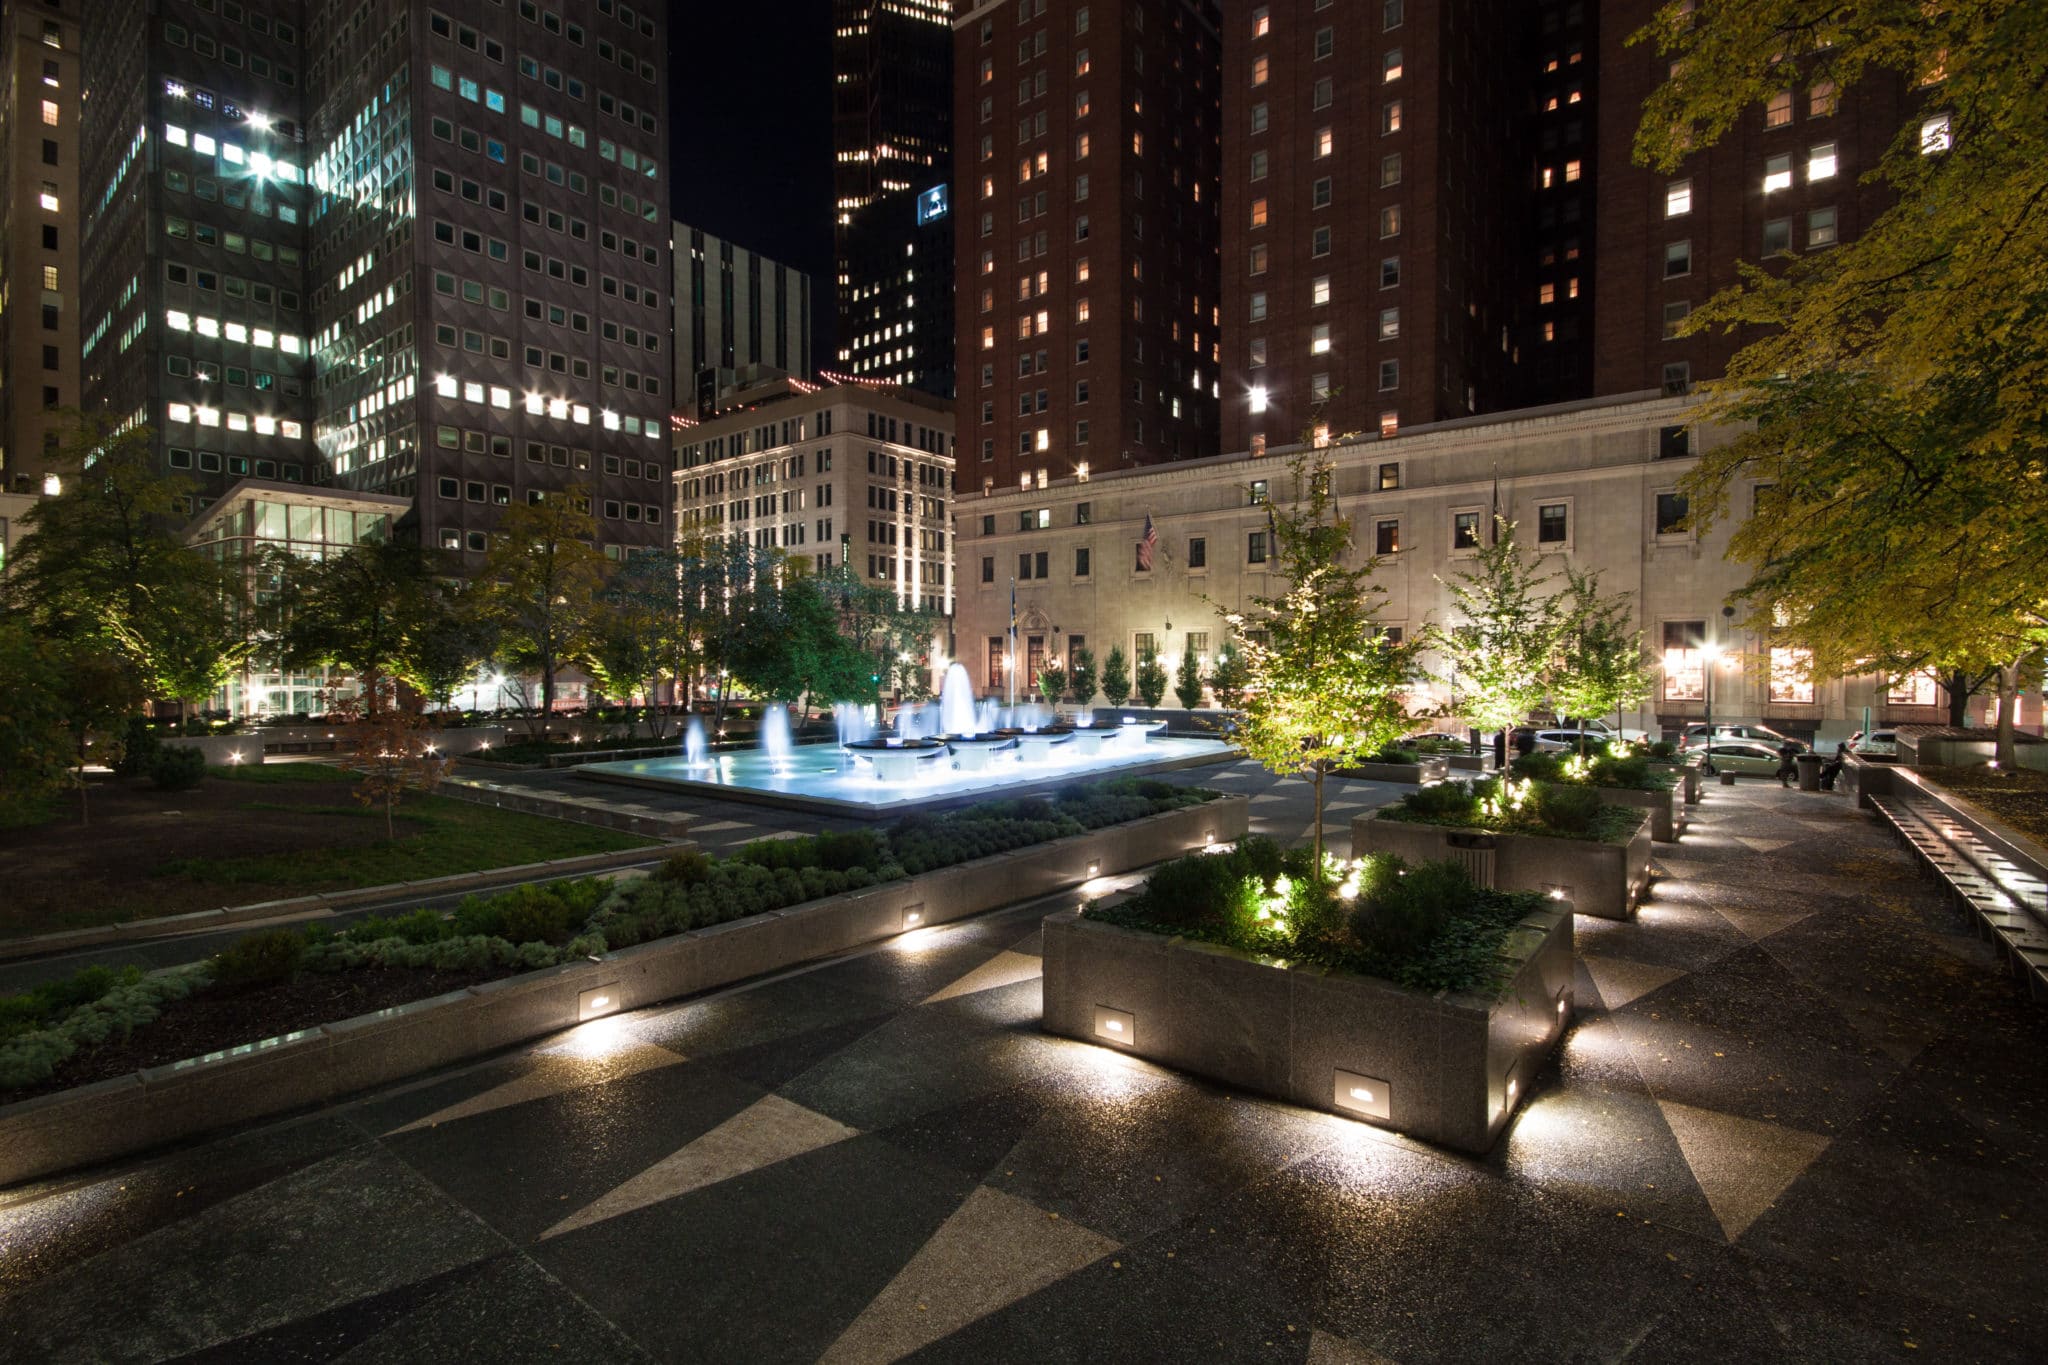 MSq Capital Projects 2015 Mellon Square Summer Fall R (Jeremy Marshall) Night